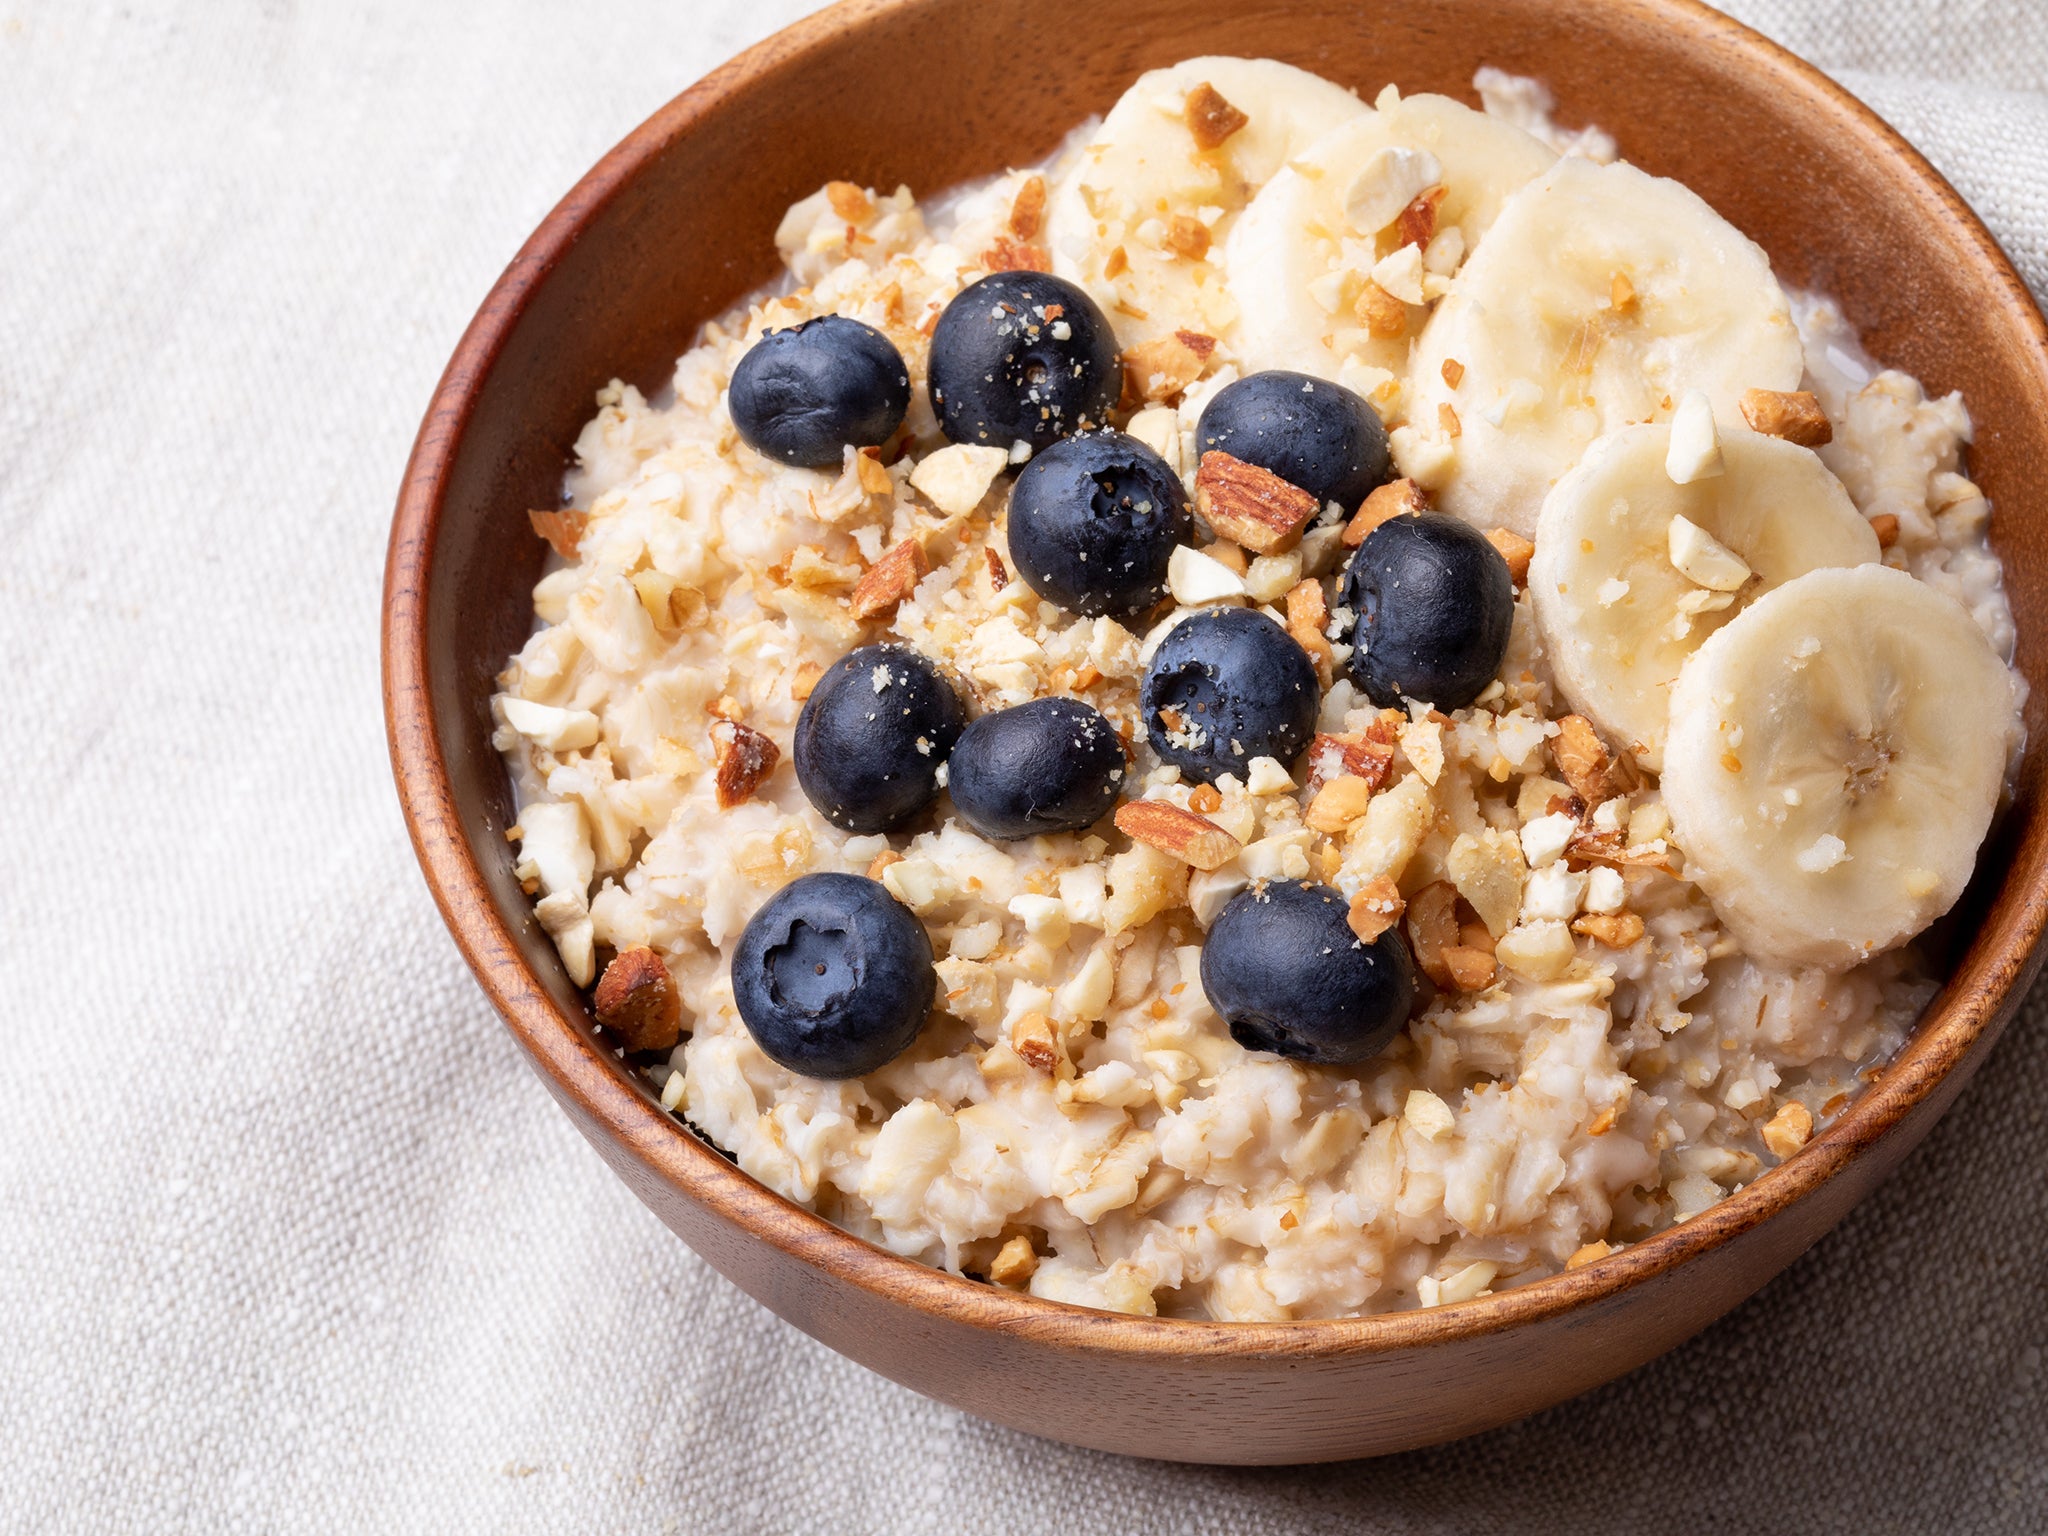 A high fibre plant-based breakfast like oats can keep you energsied throughout the day